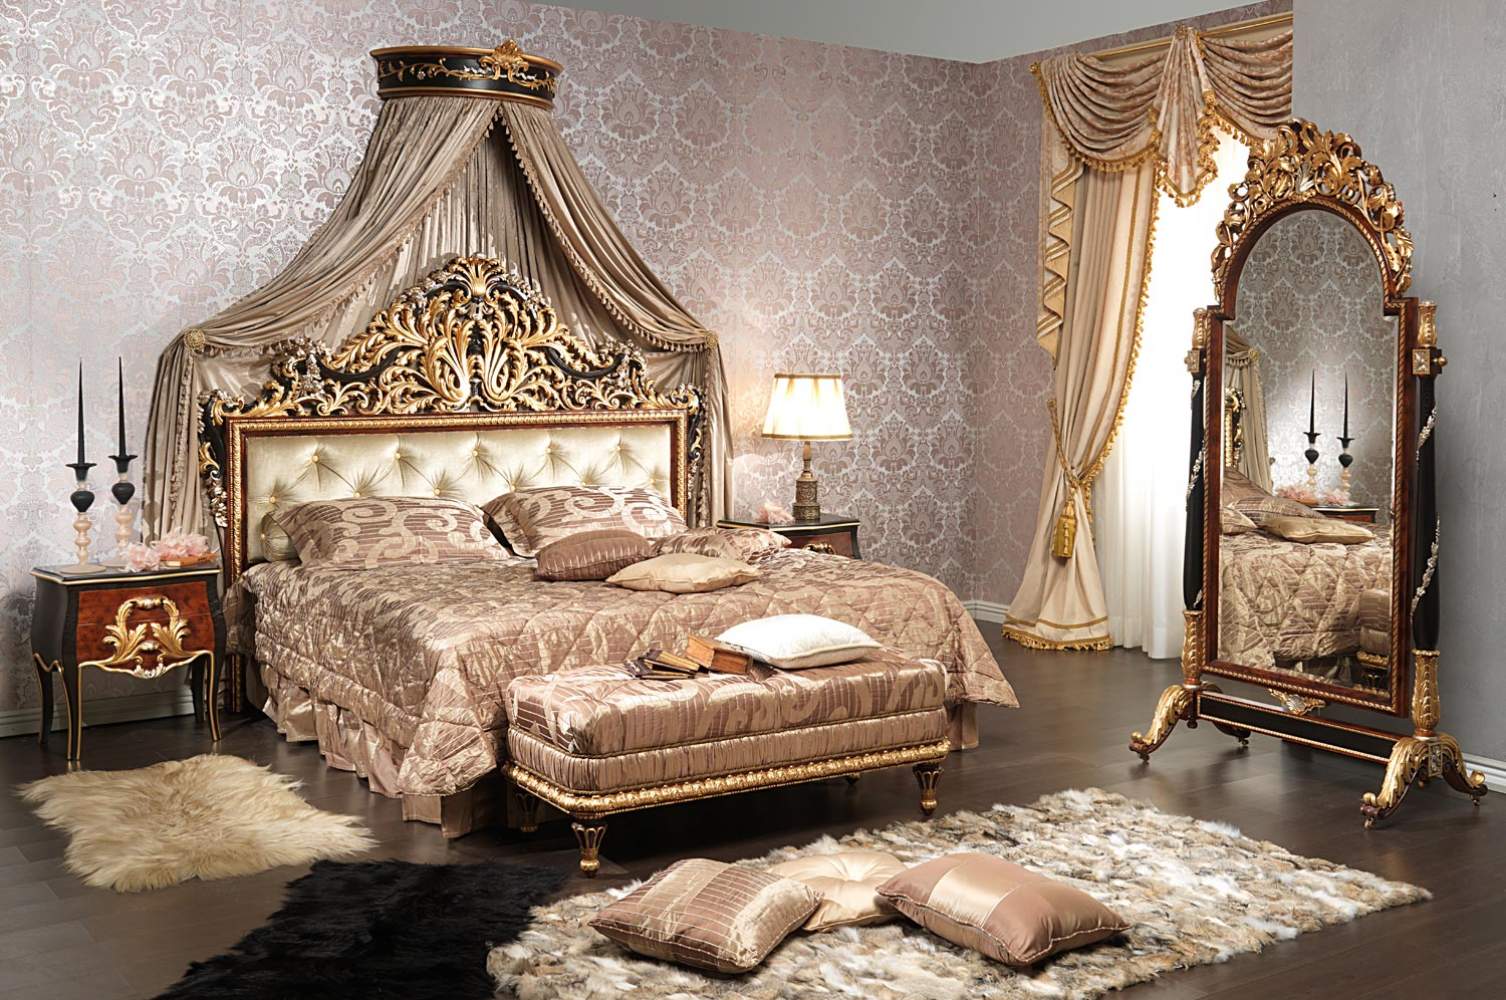 Classic Emperador Black bedroom in carved wood, black and gold leaf, bed and mirror on wheels